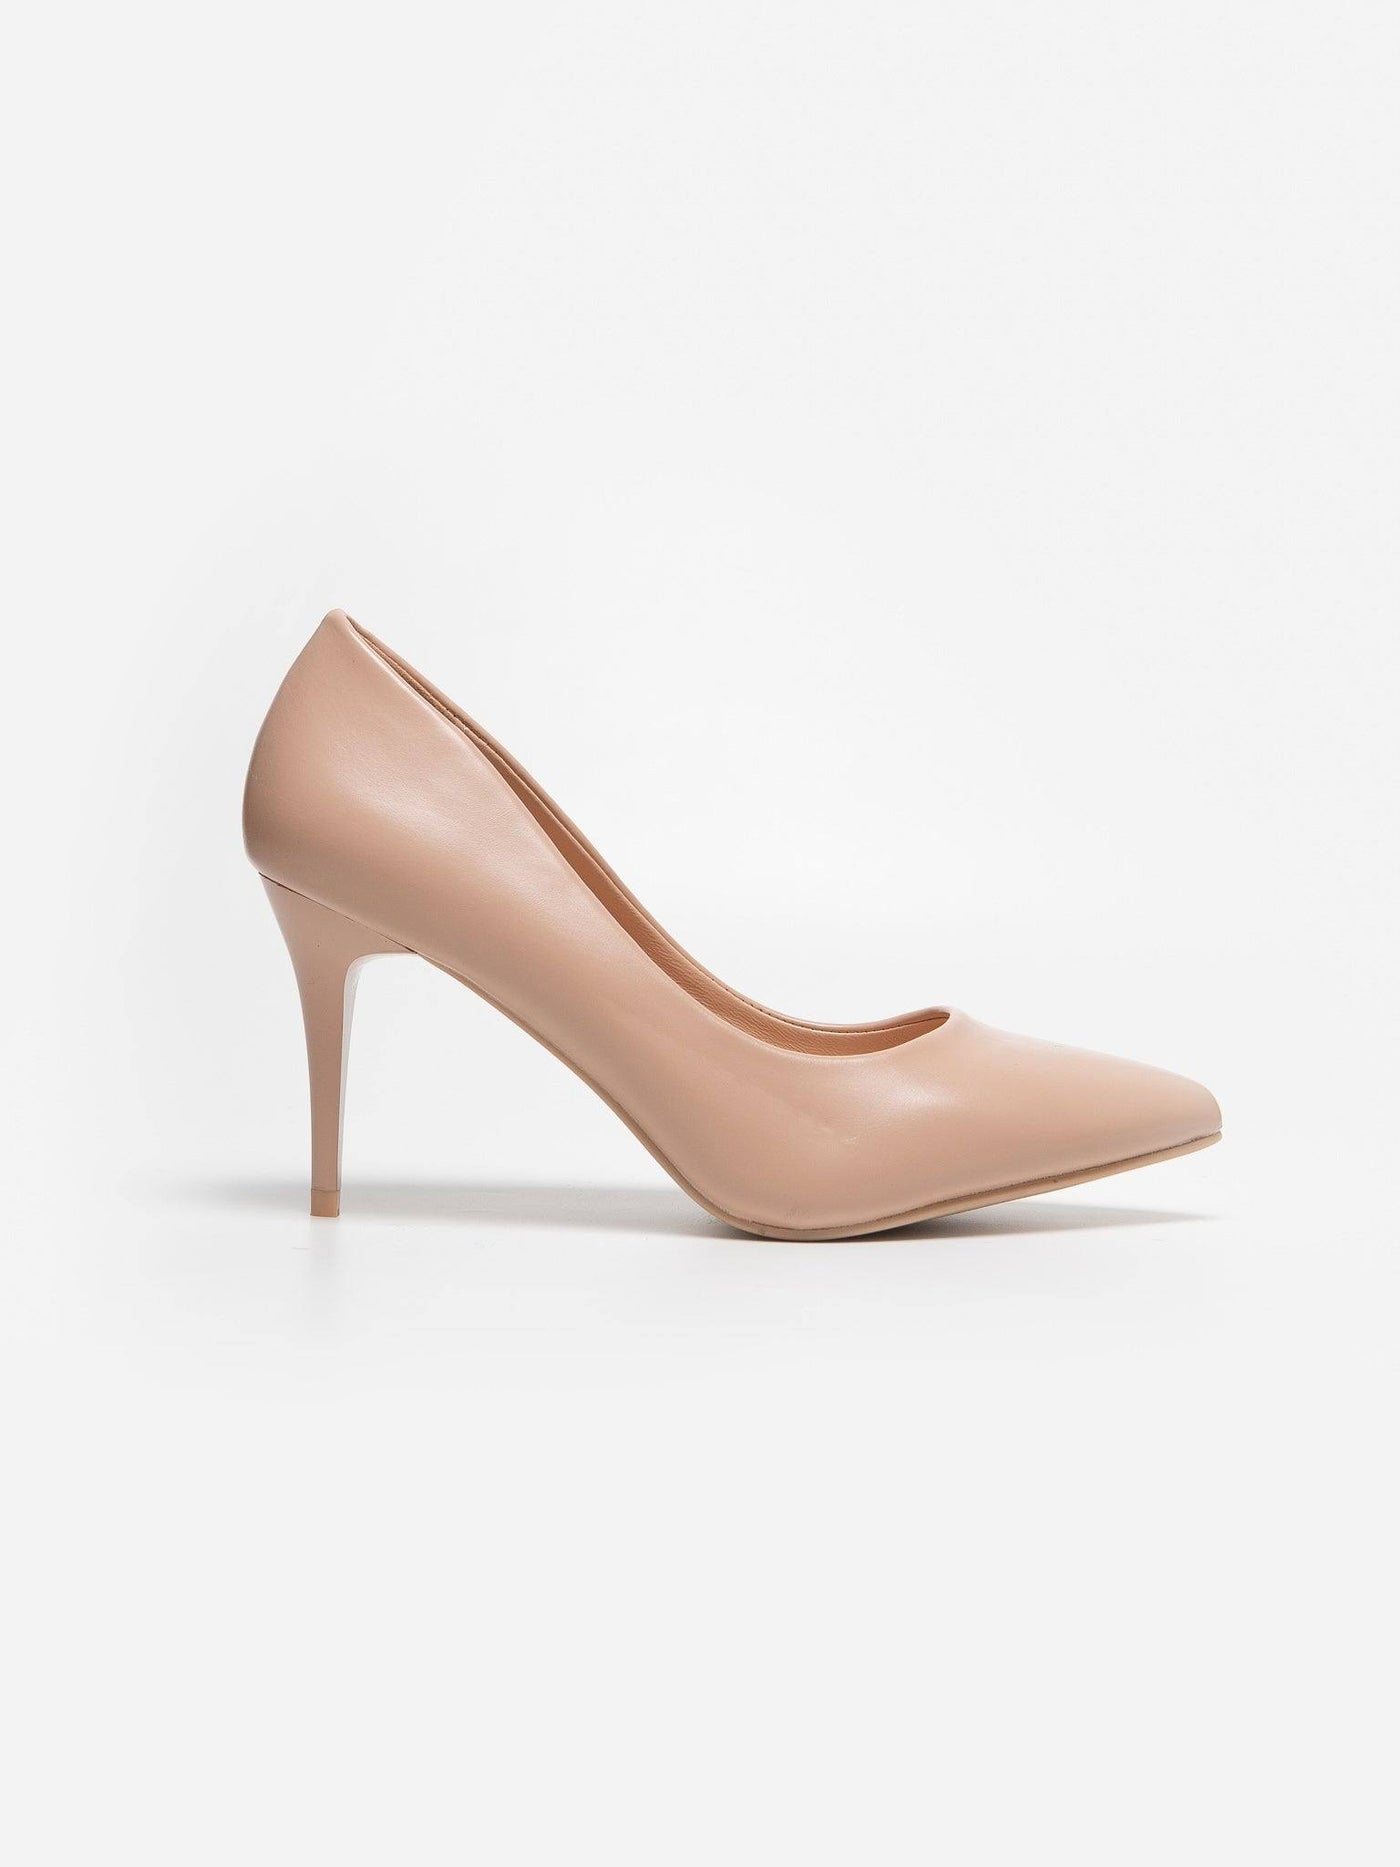 Zapato Tacón Nude - MMShoes